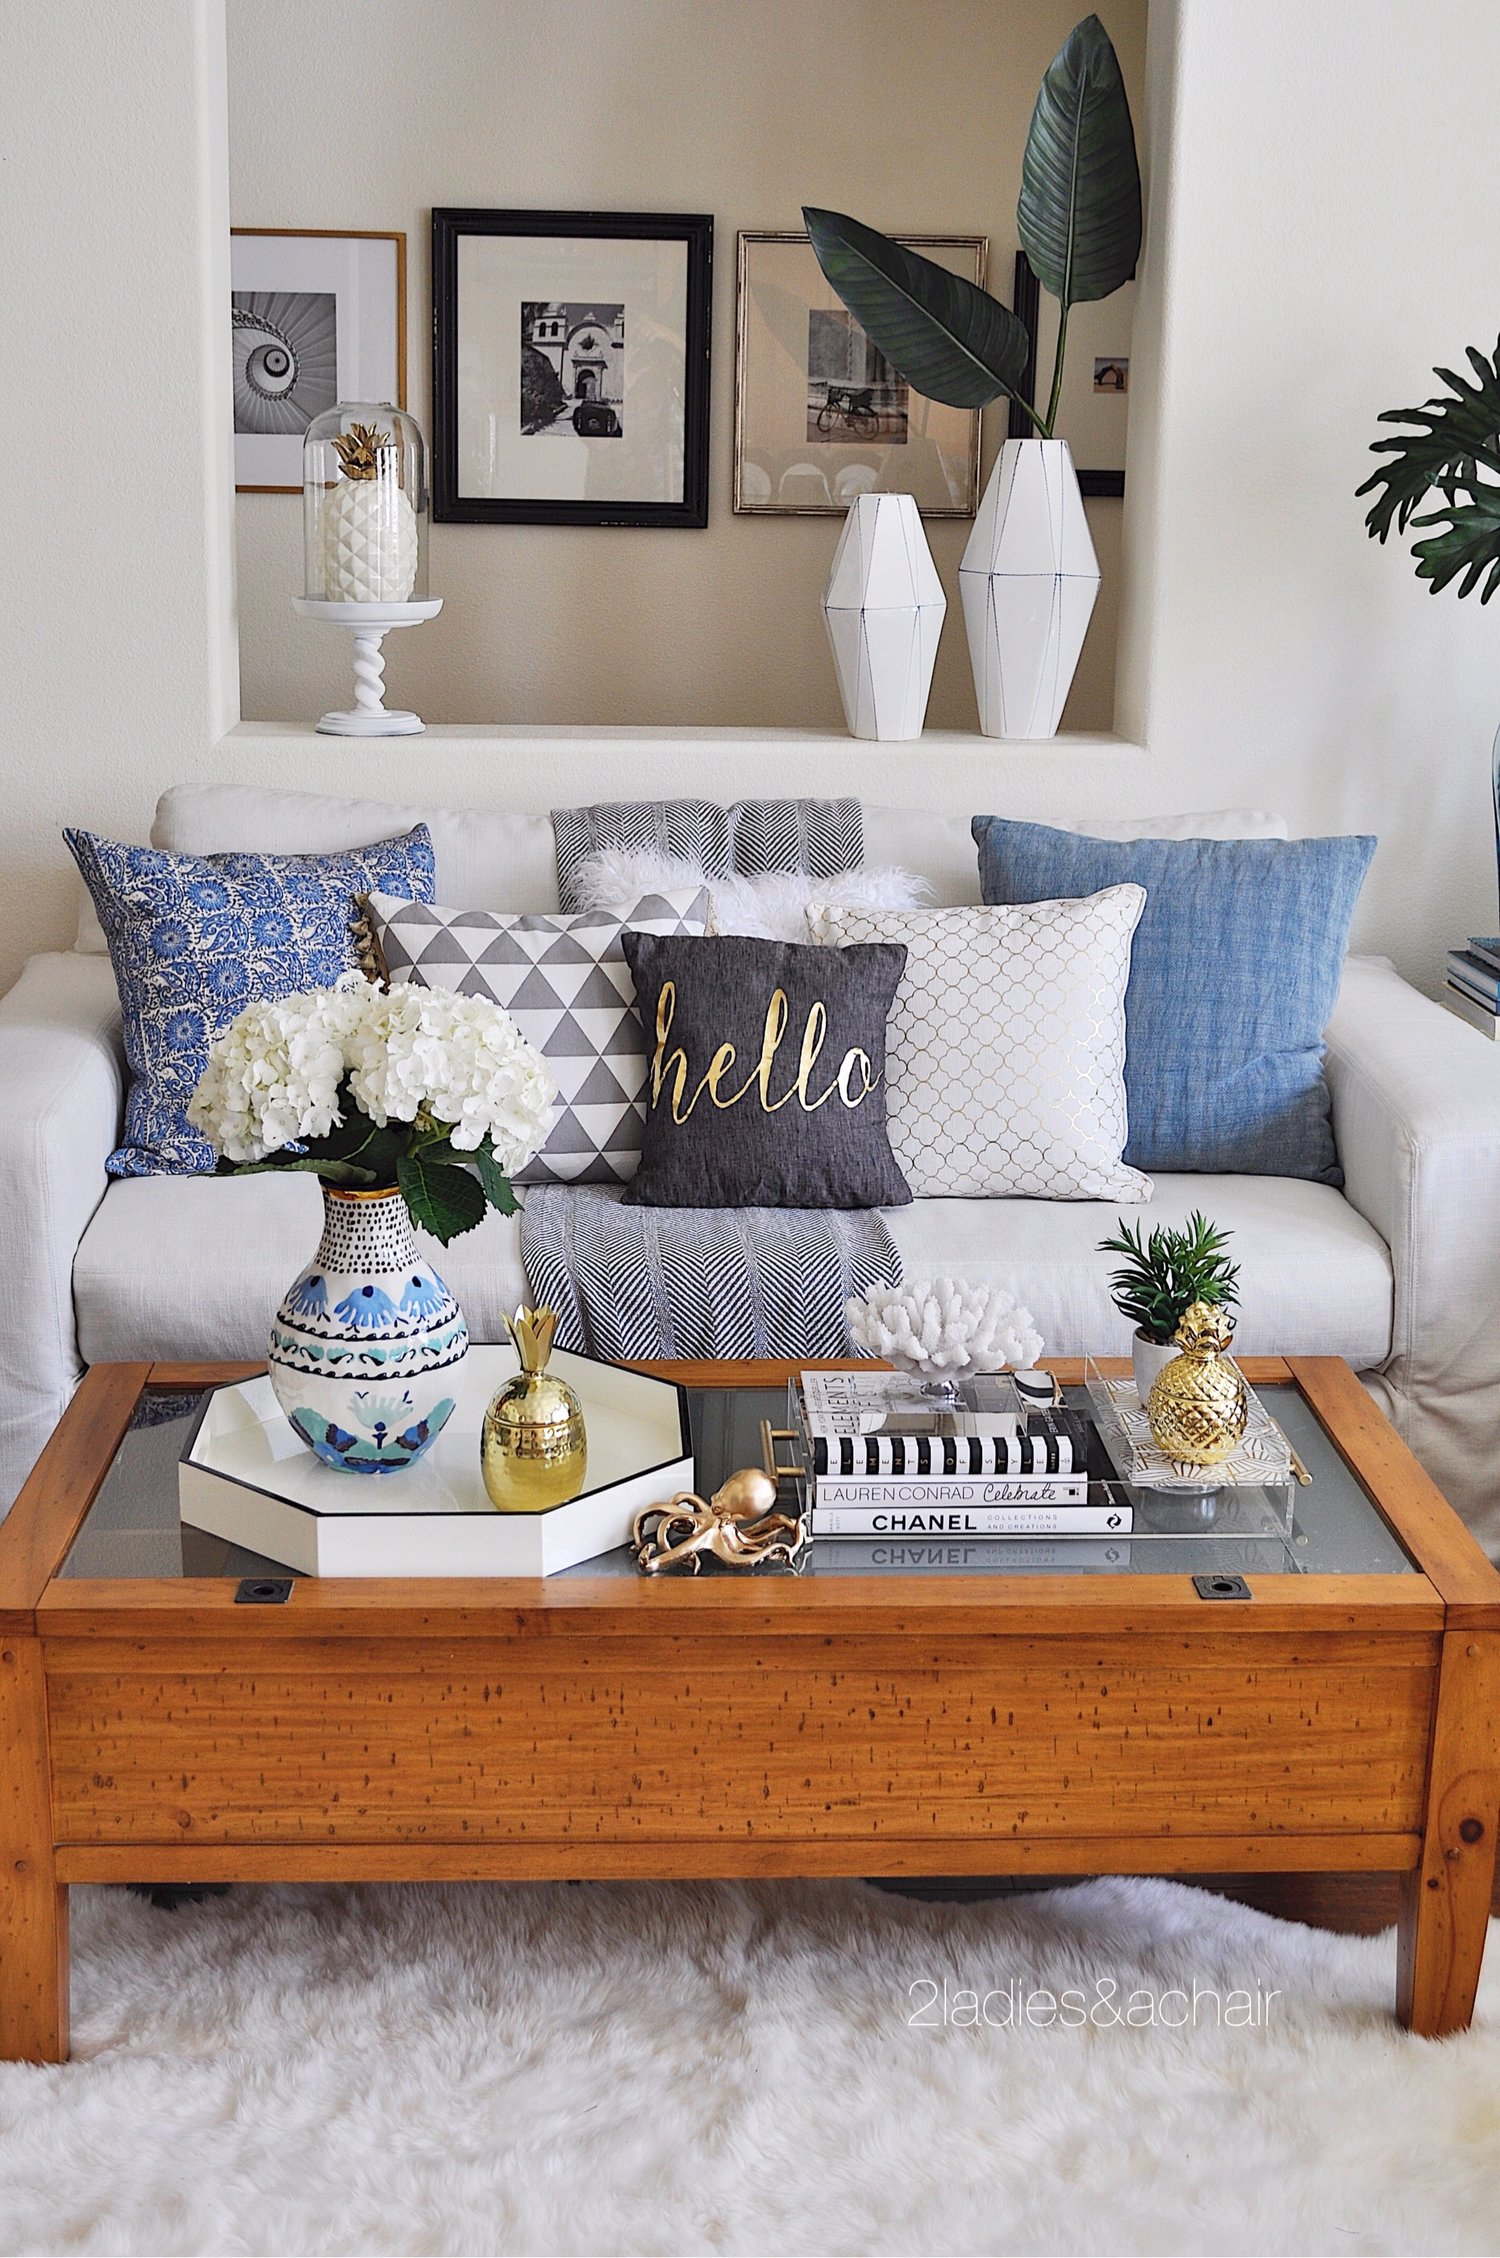 14 Ideas to Style Your Home for Spring